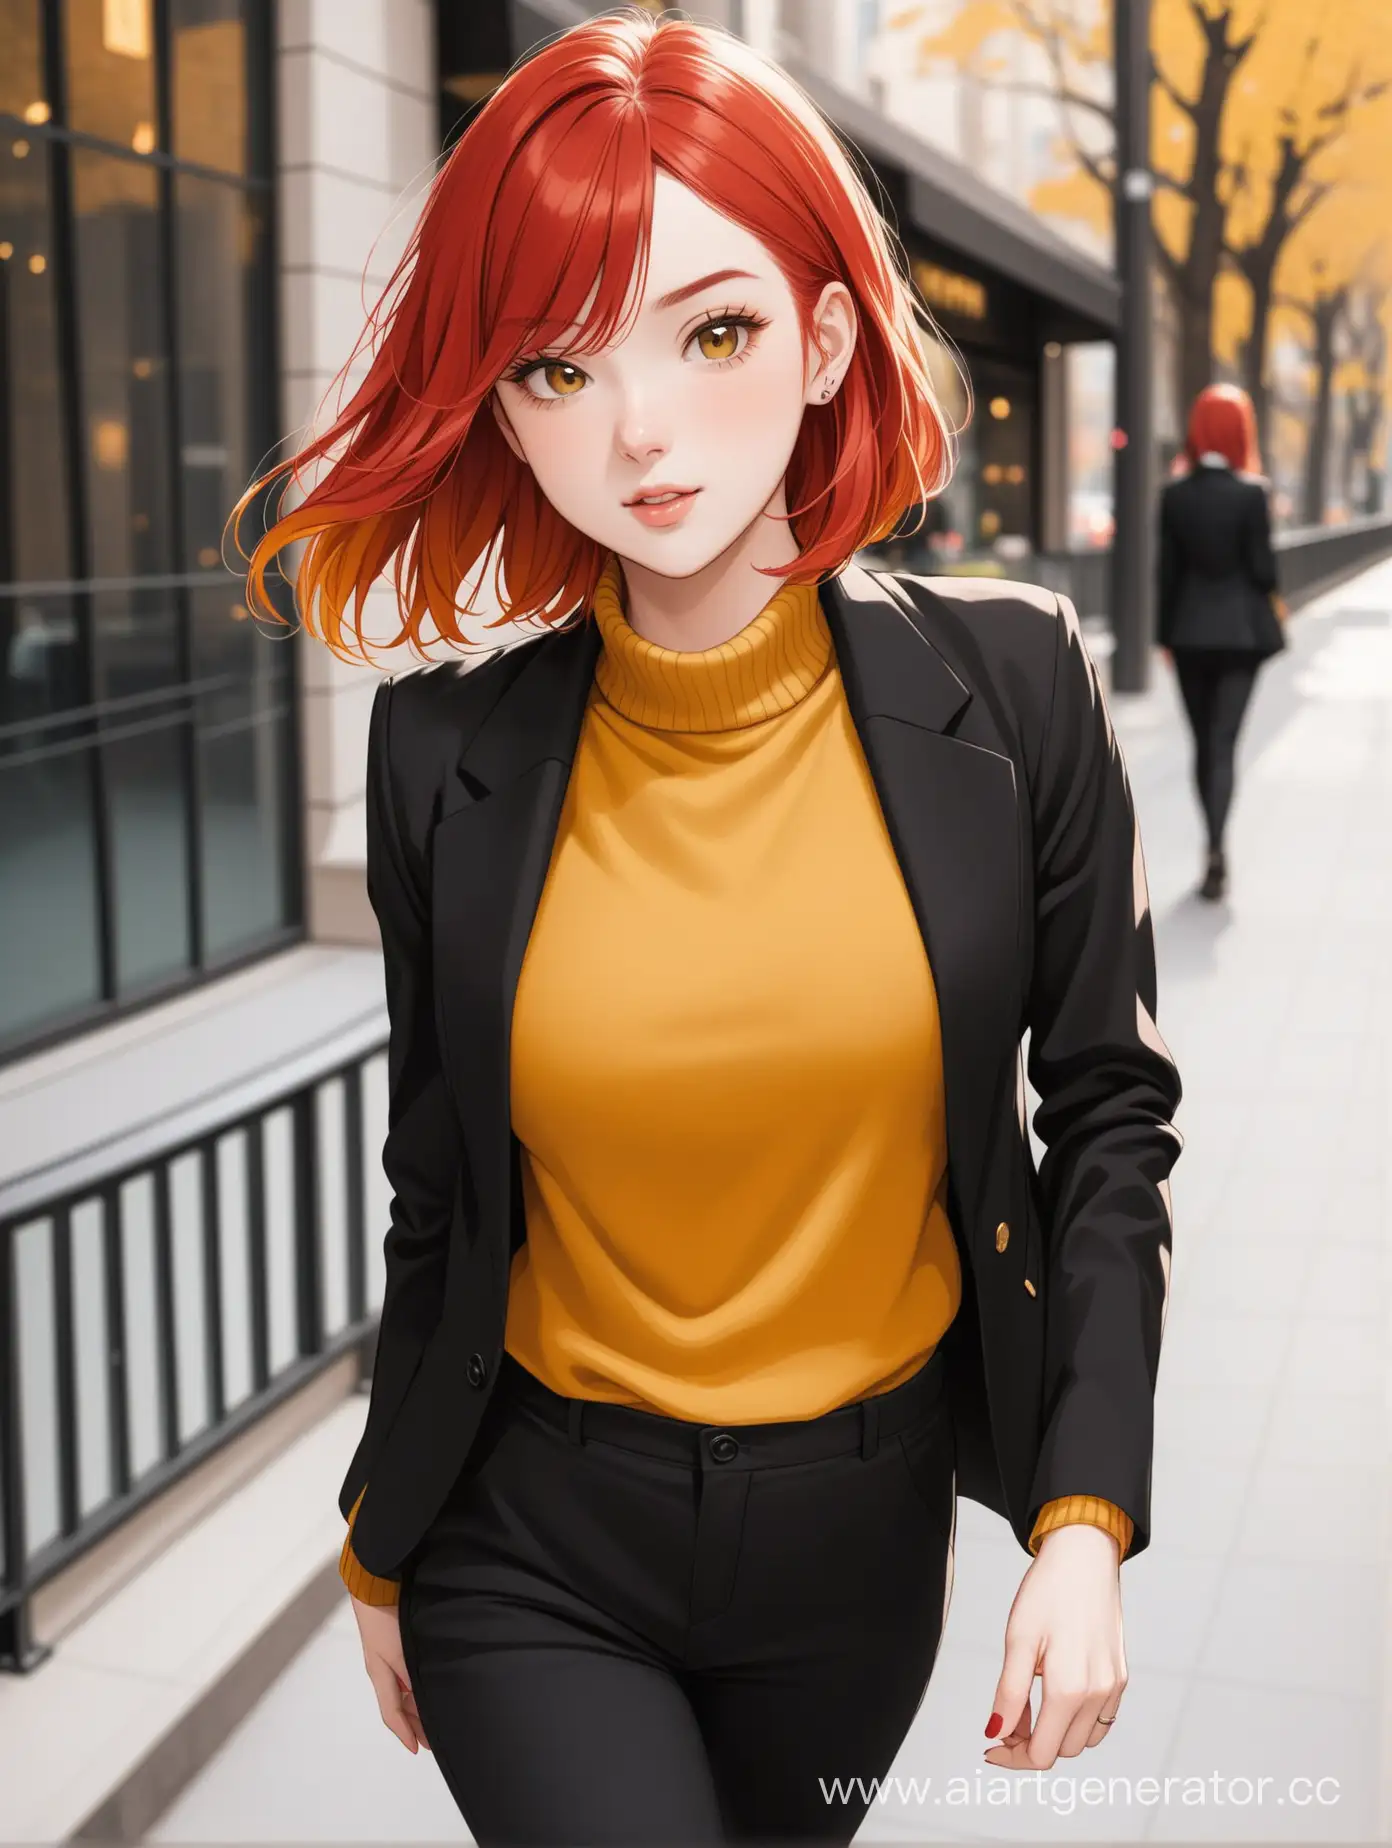 Stylish-RedHaired-Girl-in-Mustard-Sweater-and-Black-Blazer